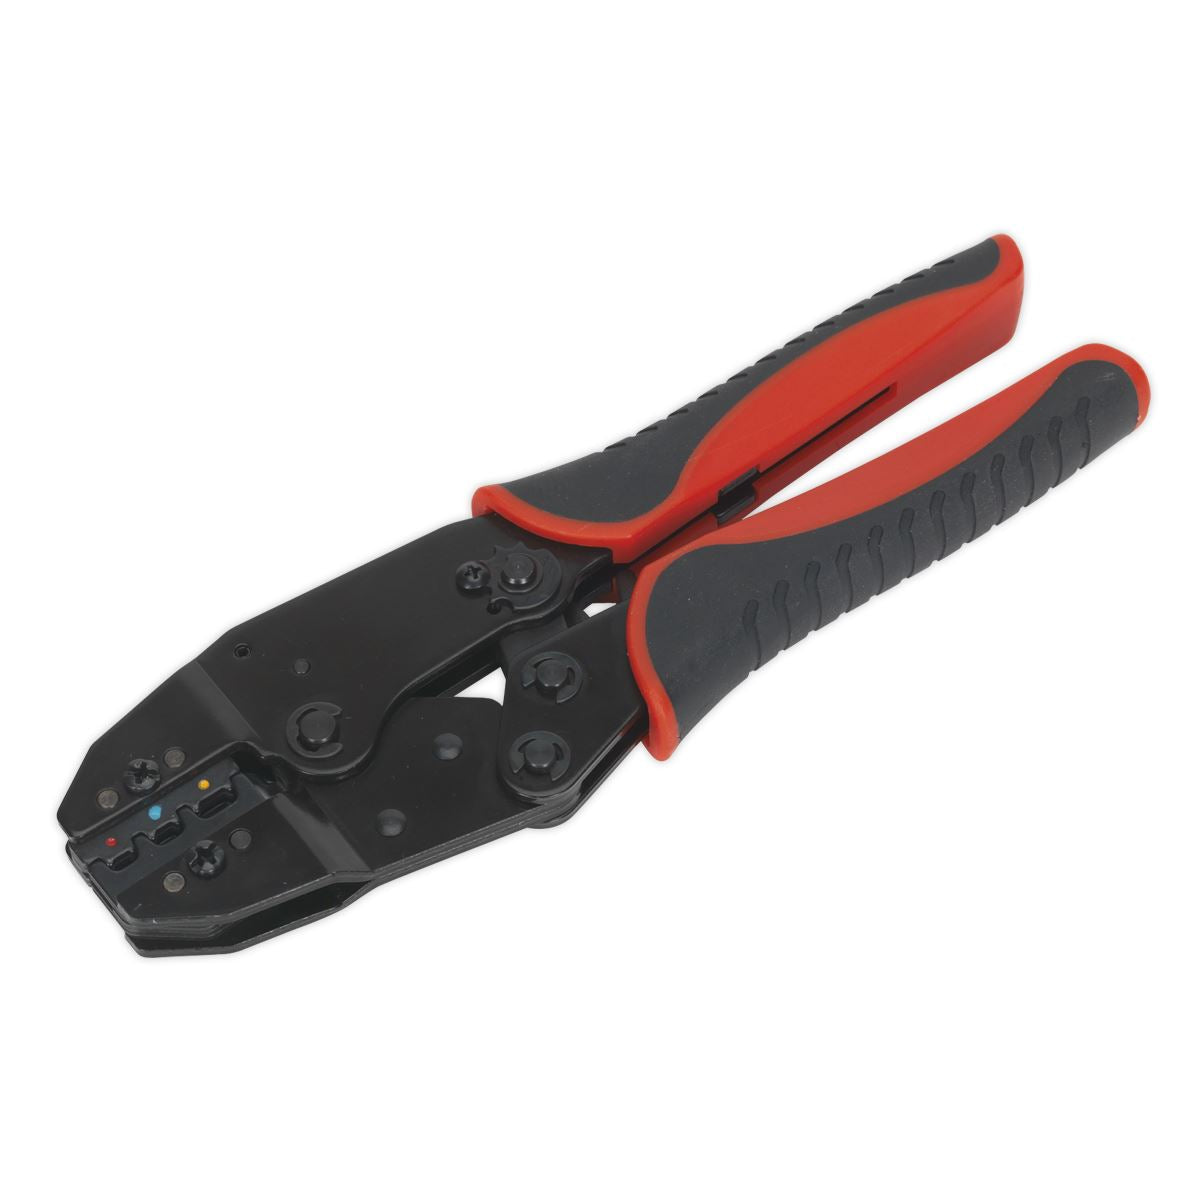 Sealey Ratchet Crimping Tool 0.5-6.0mm Insulated Terminals Electrical